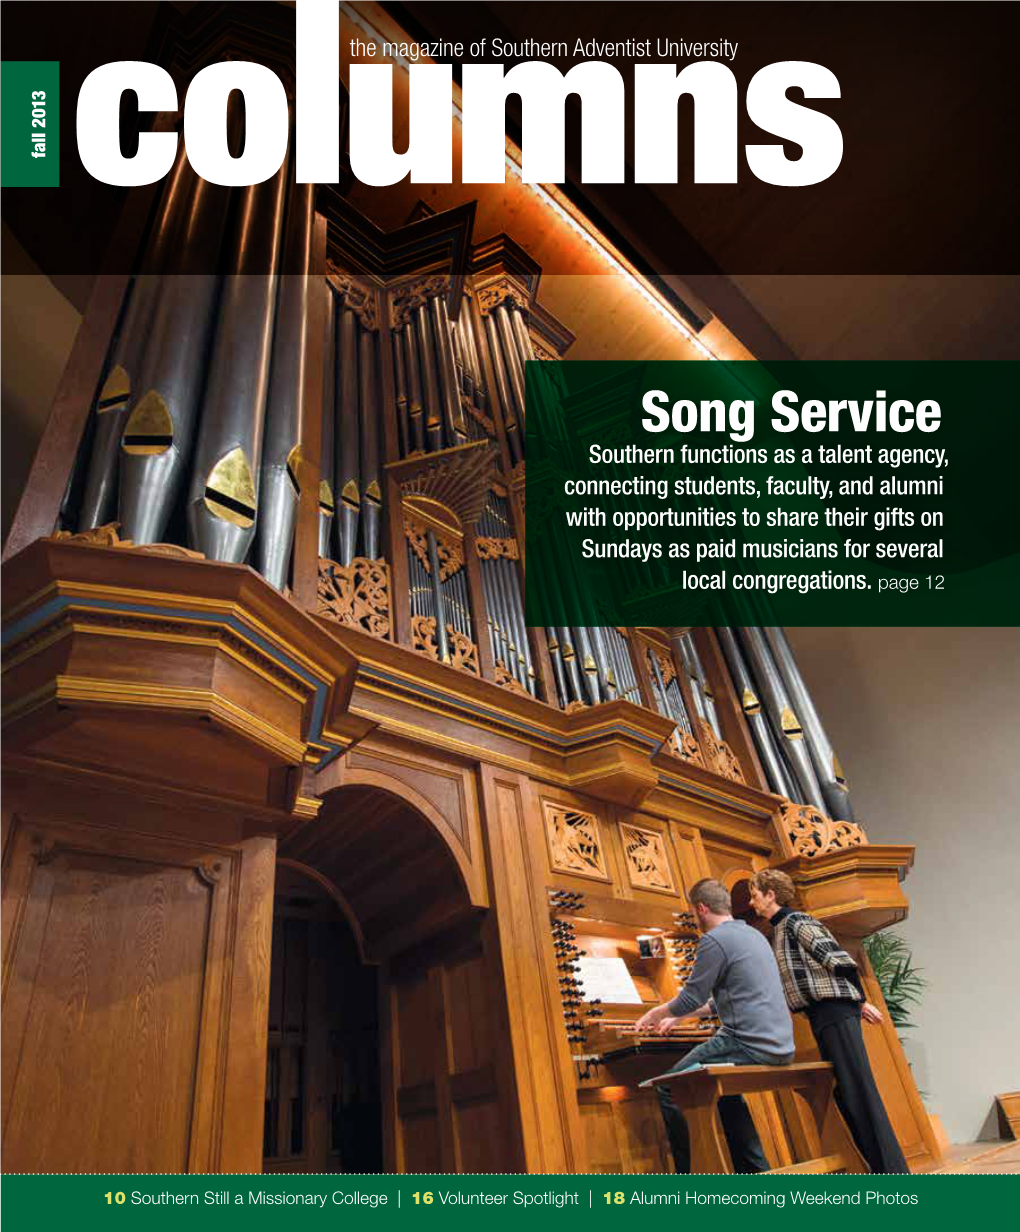 Song Service Local Congregations